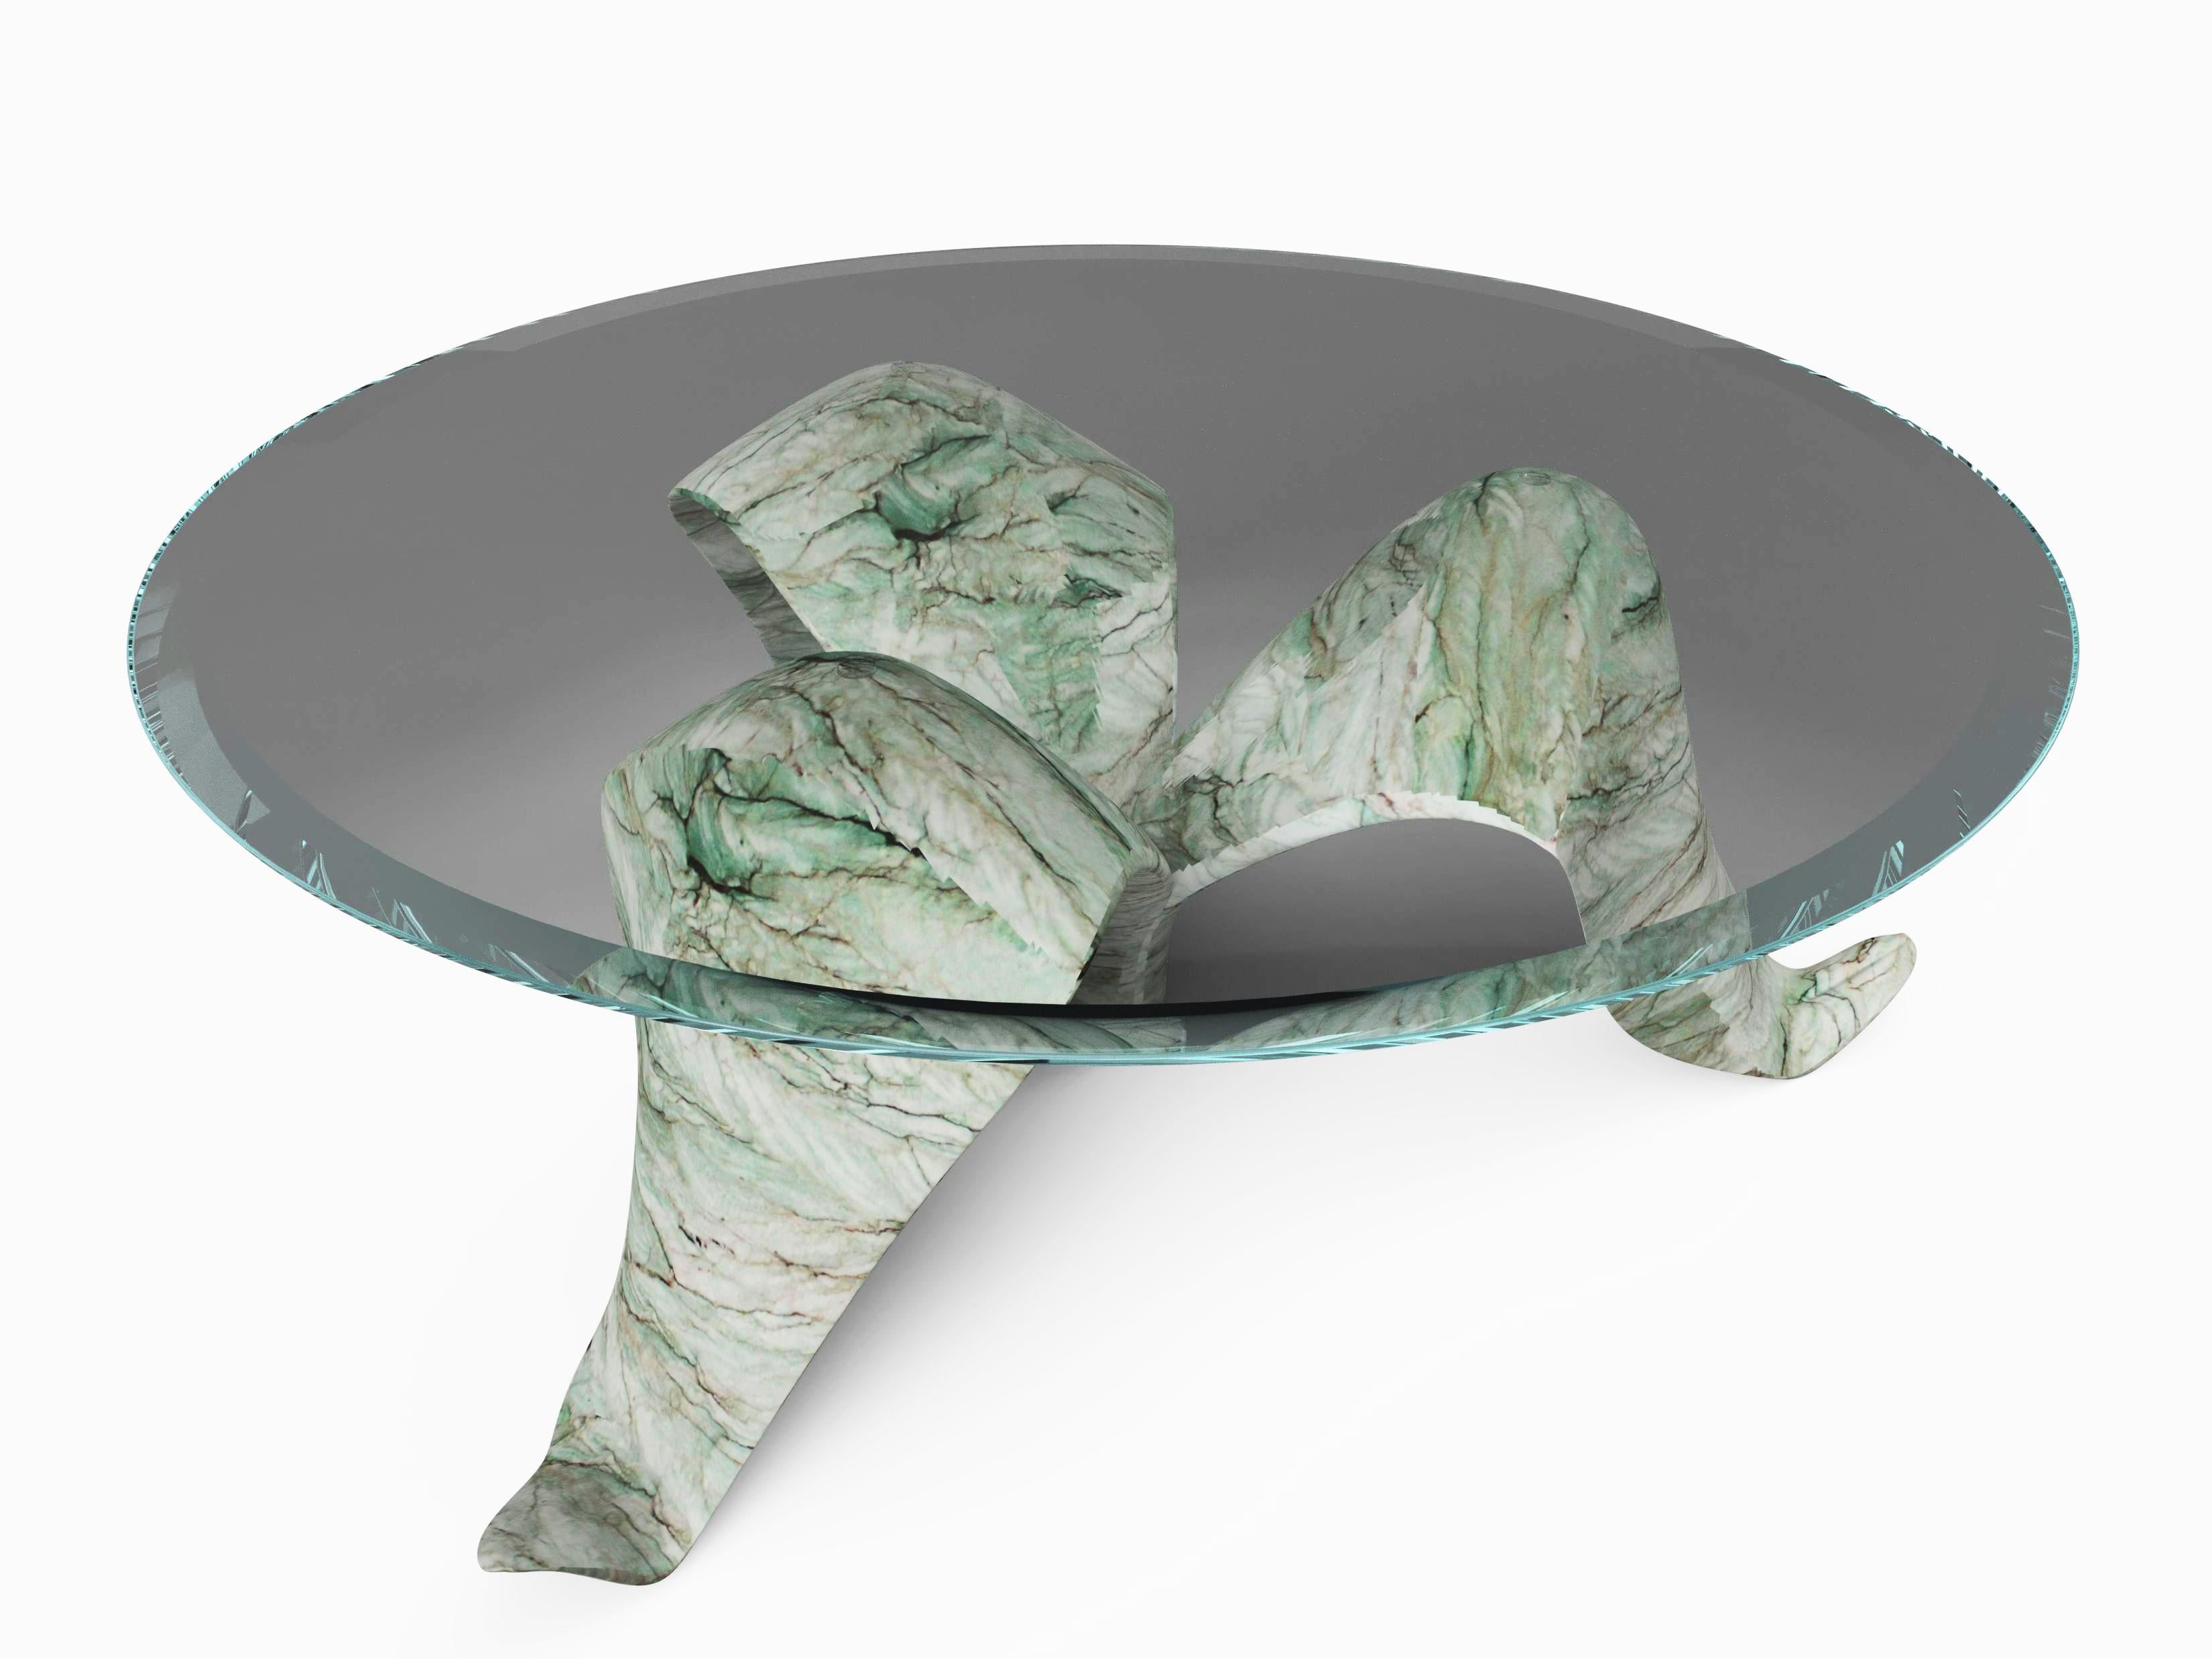 Hand-Crafted Diamond Leaf Coffee Table, 1 of 1 by Grzegorz Majka For Sale